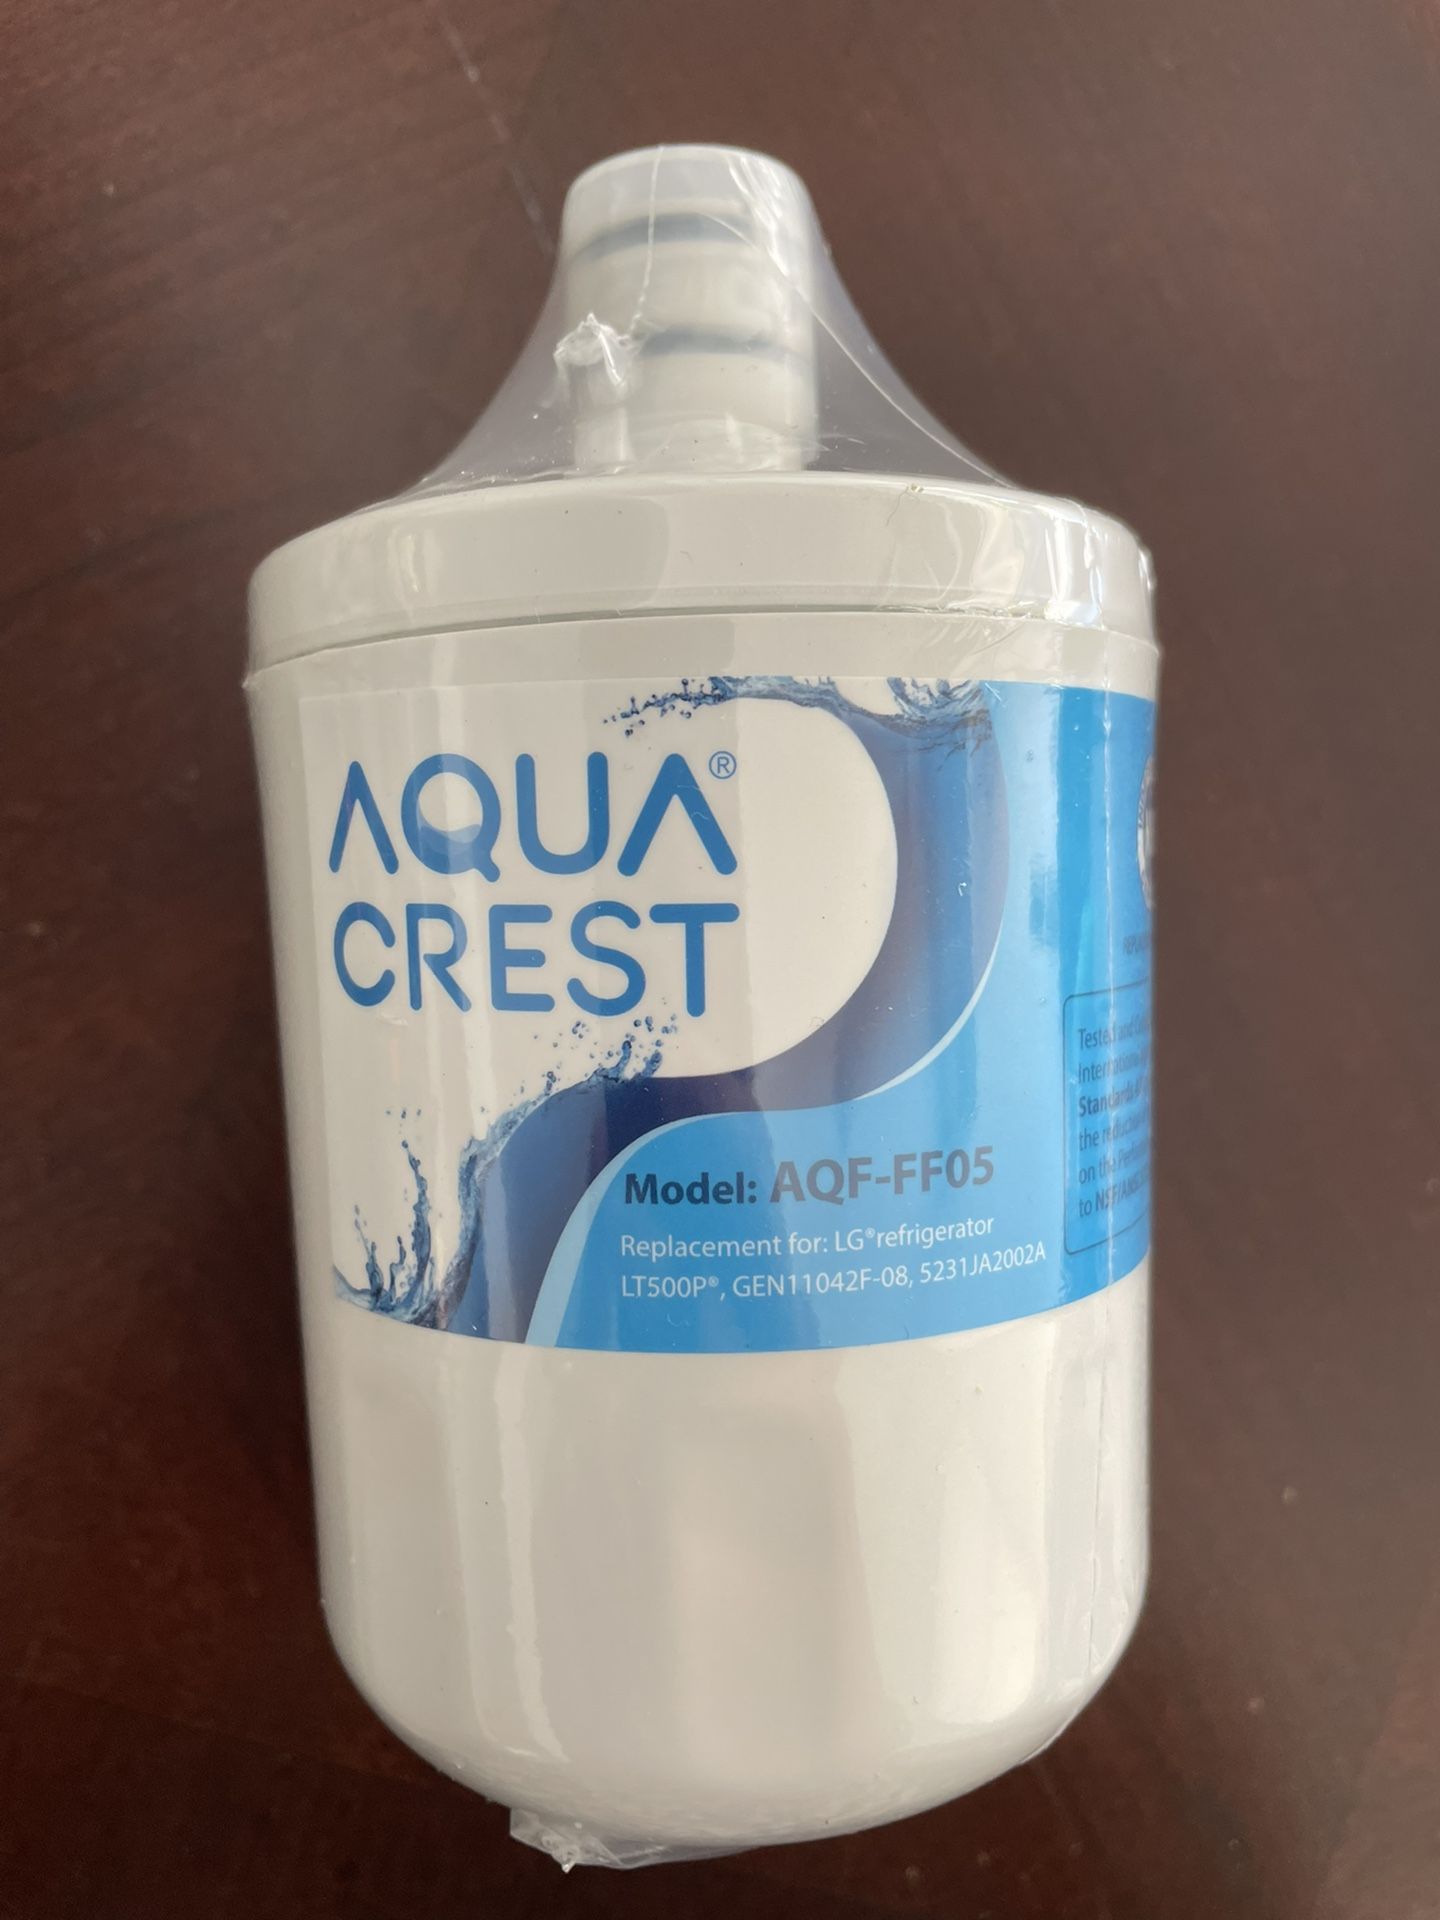 Aqua Crest AQF-FF05 is replacement for LG refrigerator water filter LT500P.  The AQF-FF05 water filter is made from Korean premium carbon block, along  for Sale in Gresham, OR - OfferUp